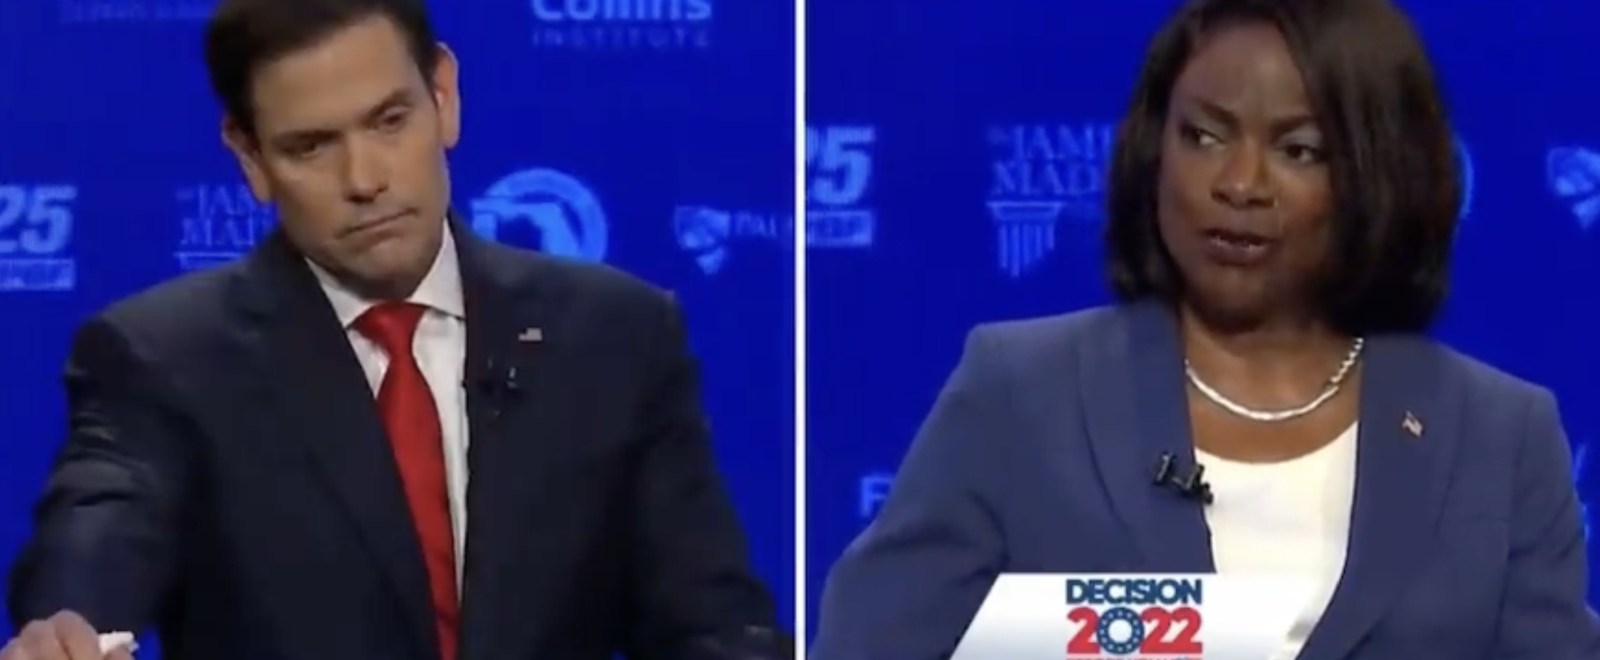 Marco Rubio Repeatedly Dragged By Val Demings During Debate